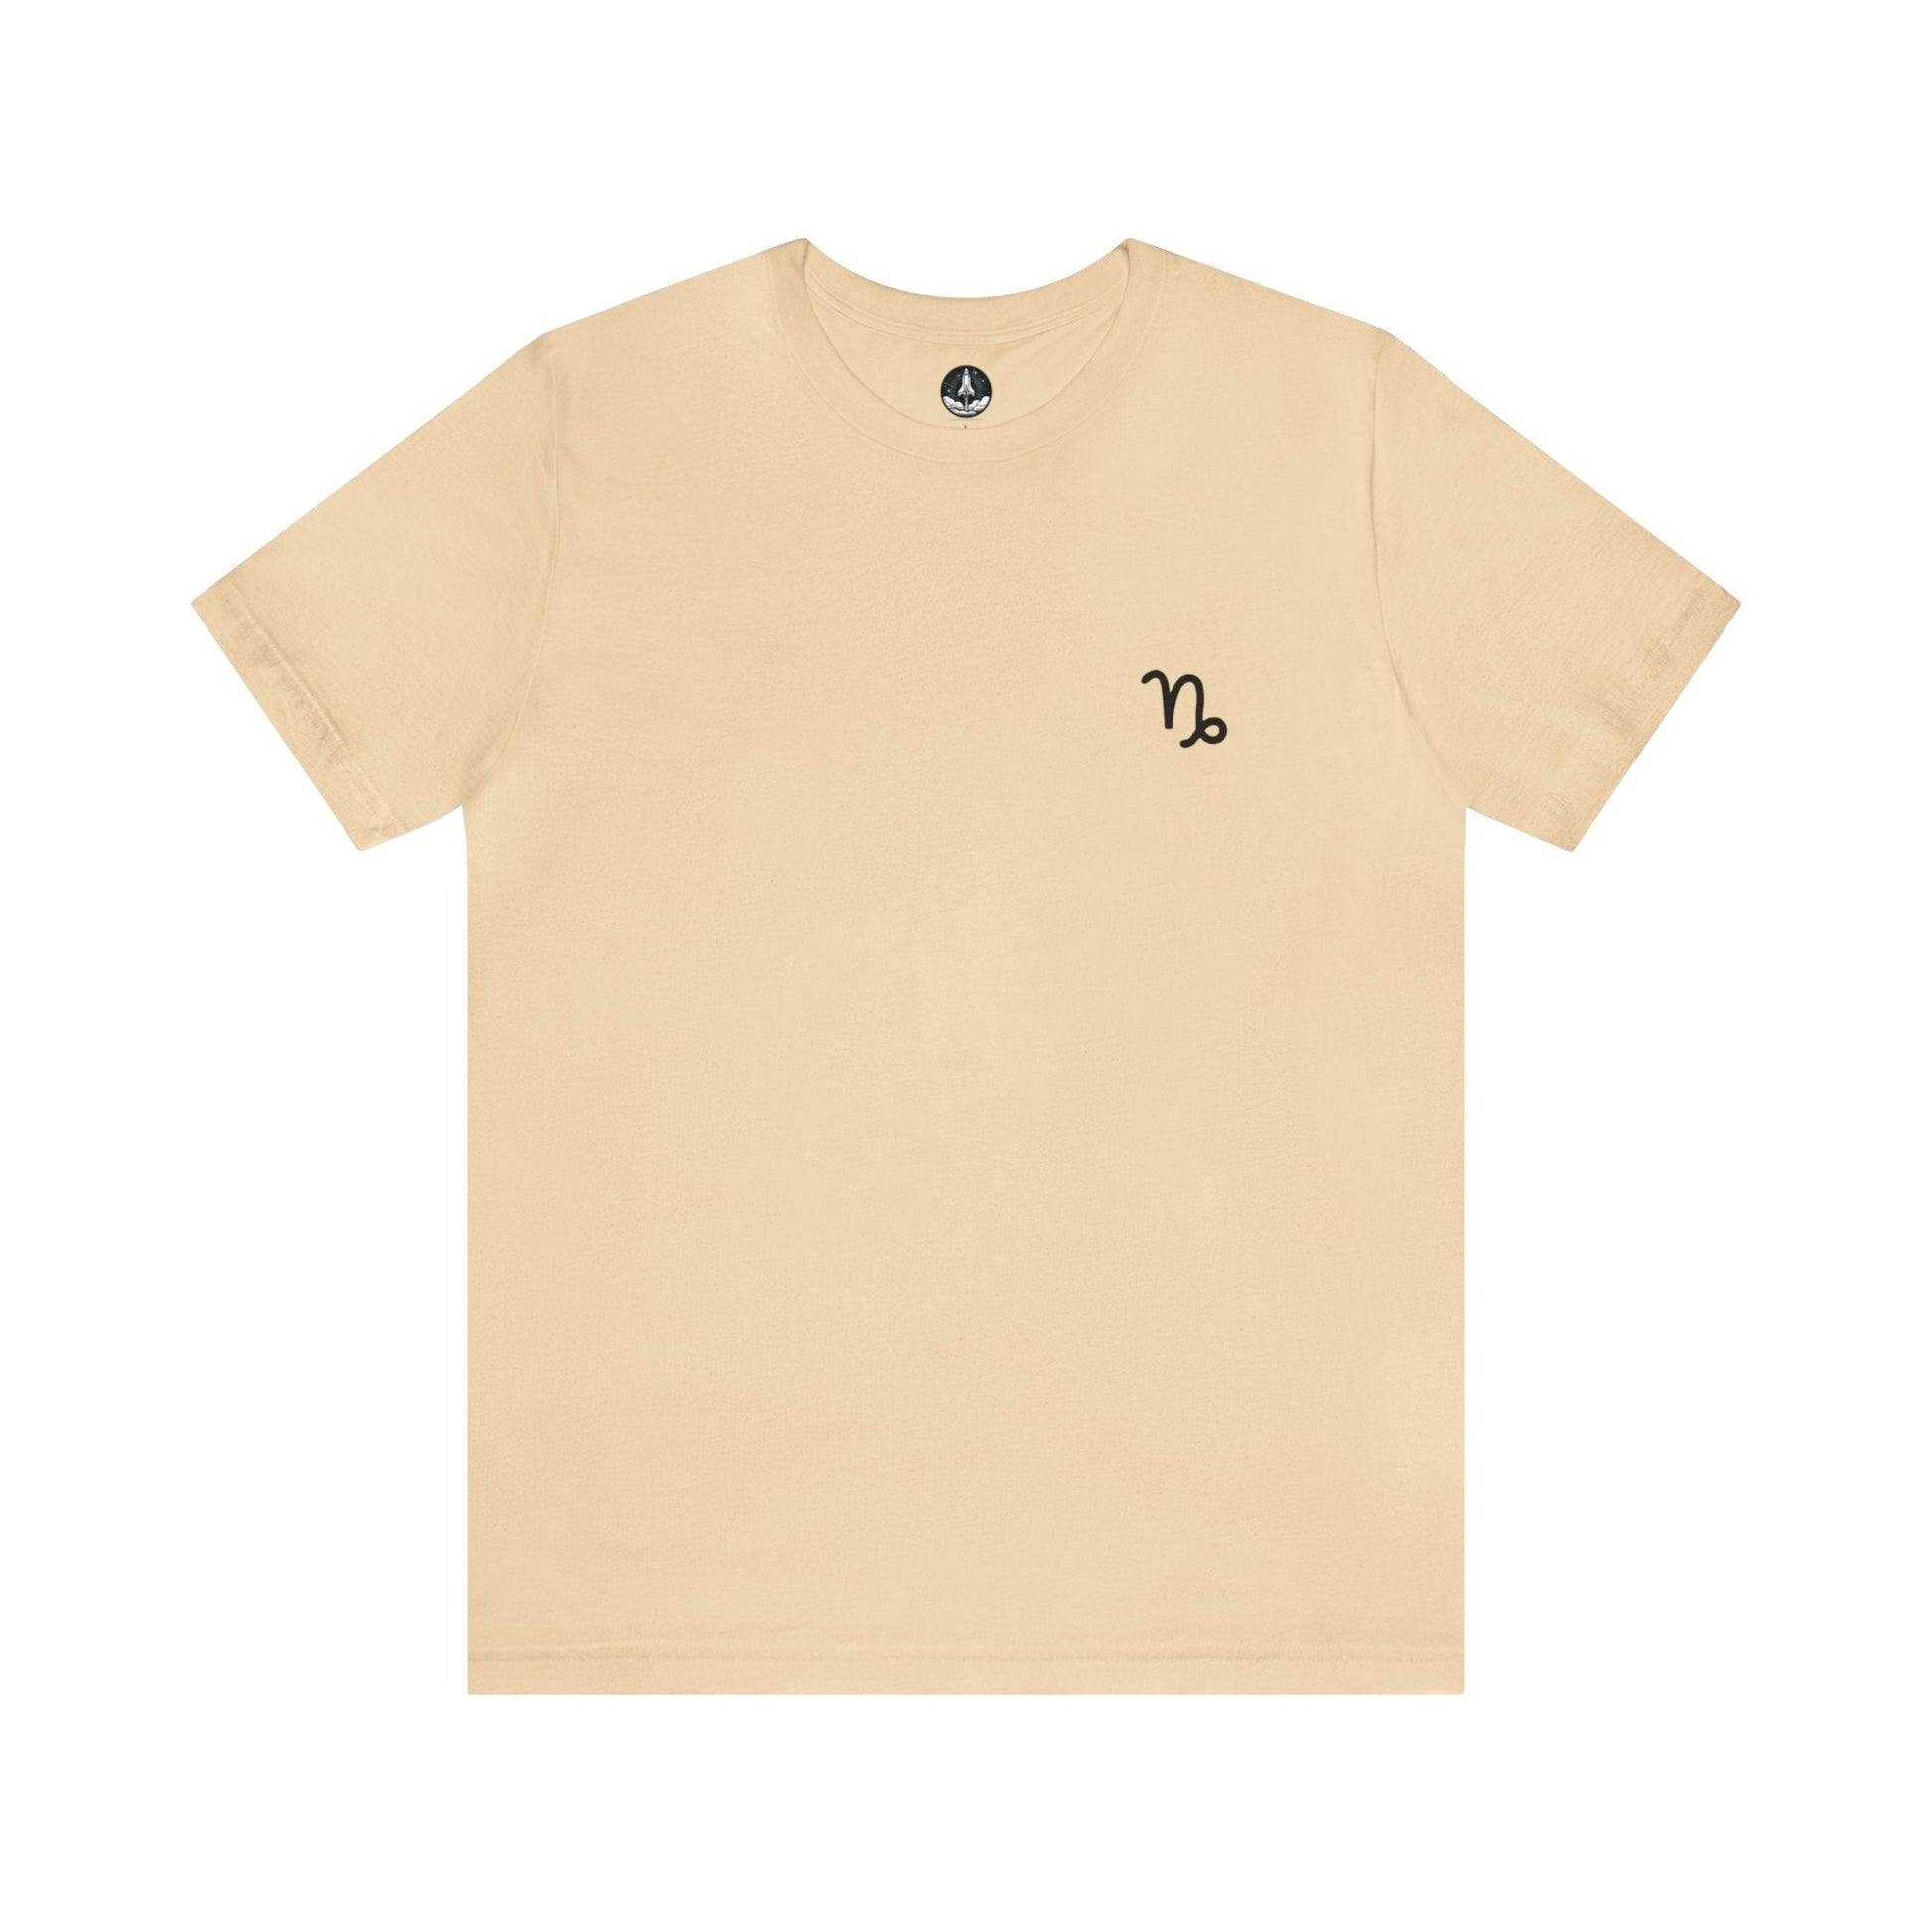 T-Shirt Soft Cream / S Capricorn Mountain Glyph T-Shirt: Peak Style for the Determined Climber